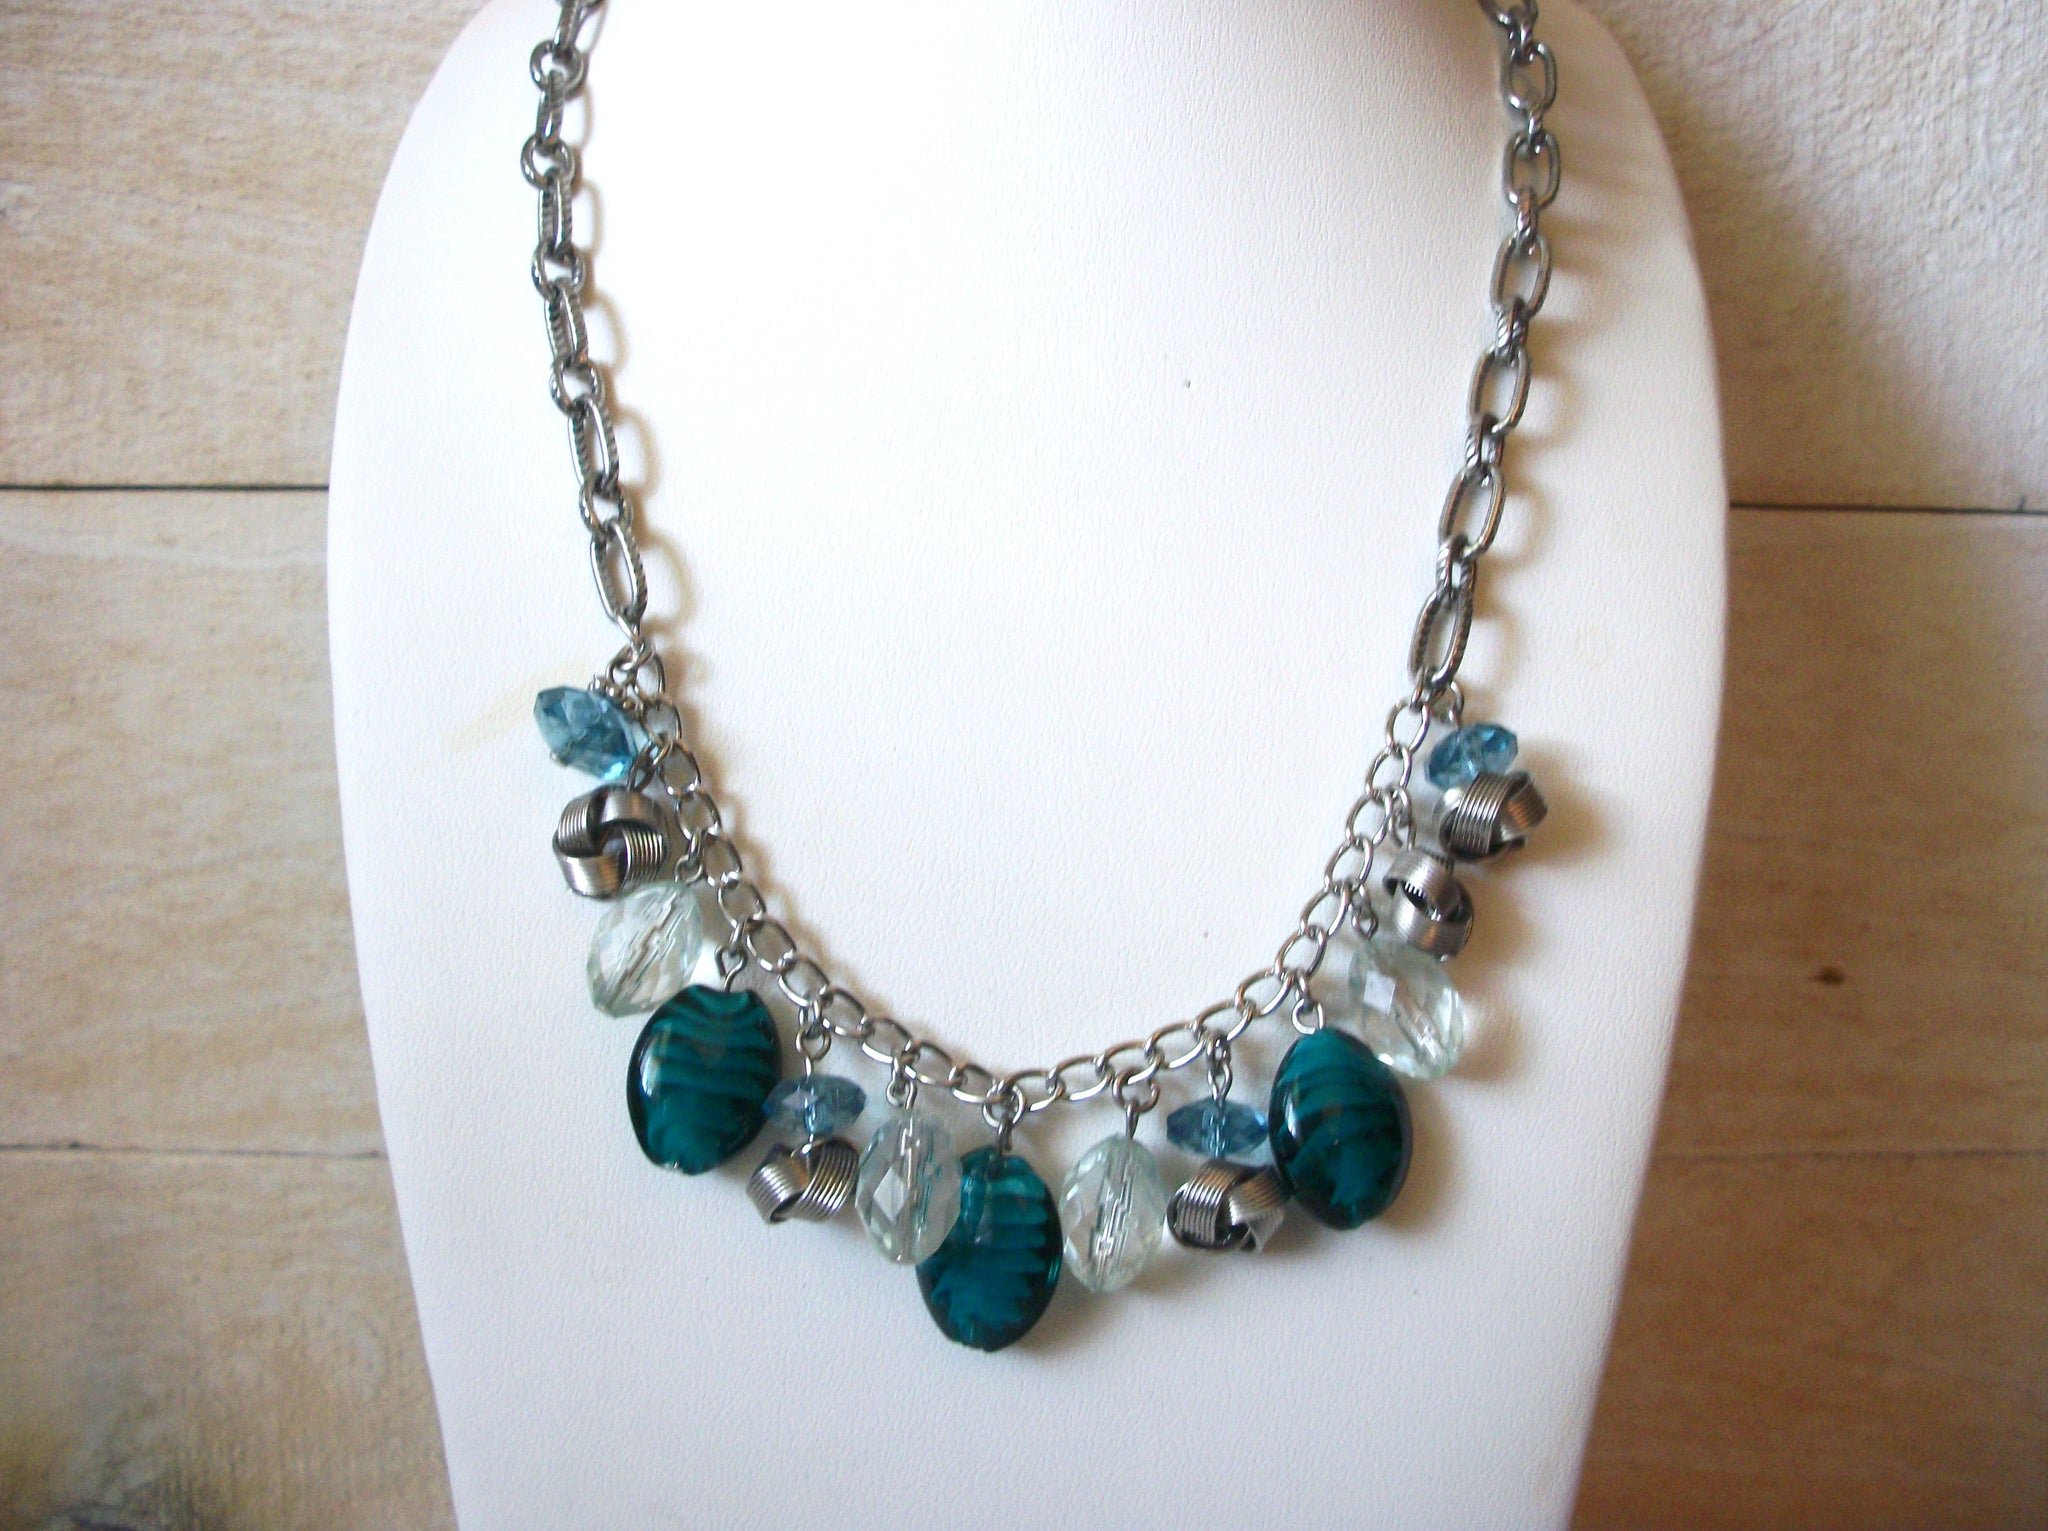 Retro Silver Teal Glass Necklace 41920